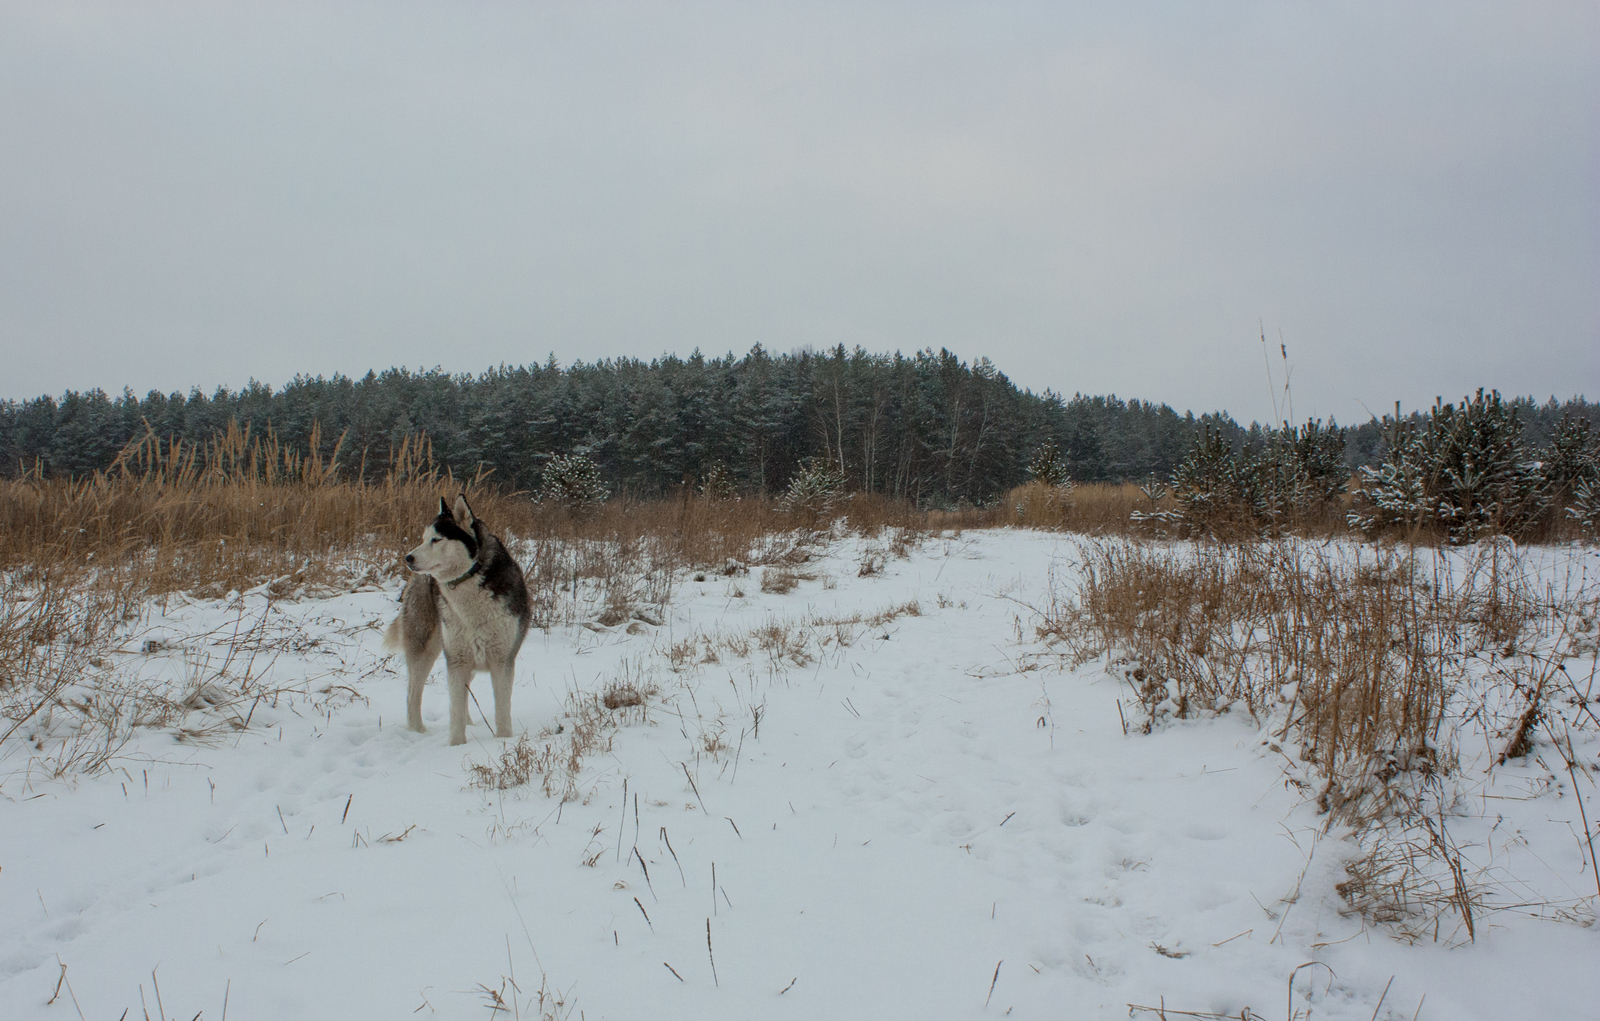 By rack - My, Canon 450d, Canon, Dog, Husky, Field, Forest, Winter